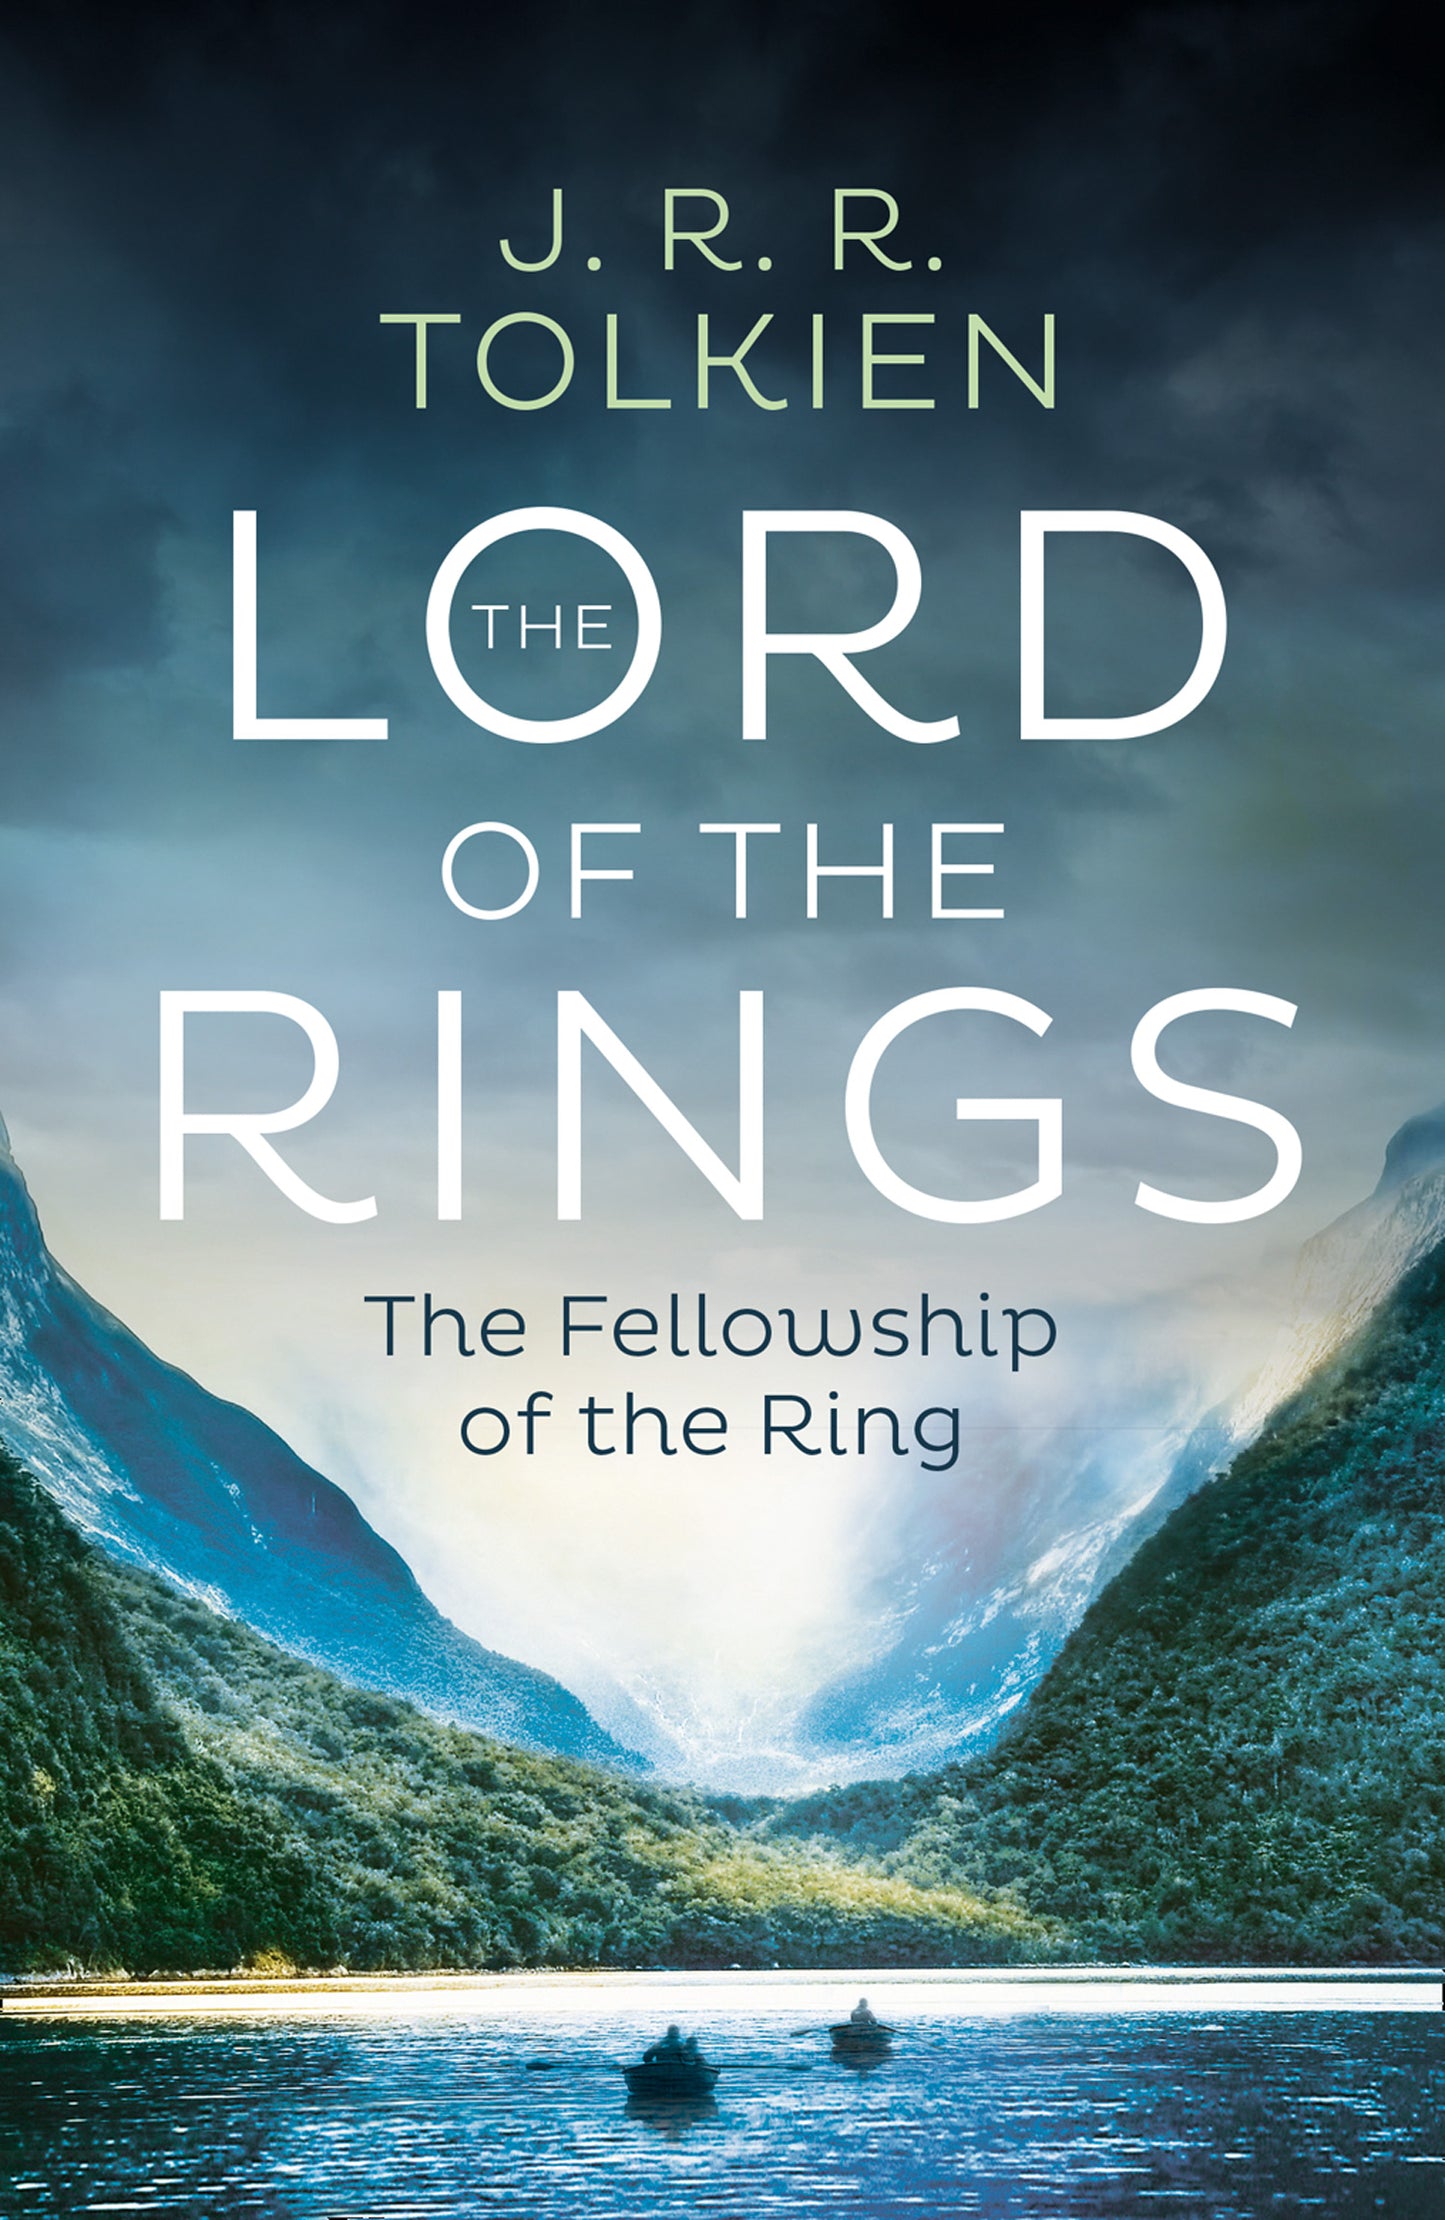 LORD OF THE RINGS THE FELLOWSHIP OF THE RING by J.R.R. Tolkien - City Books & Lotto